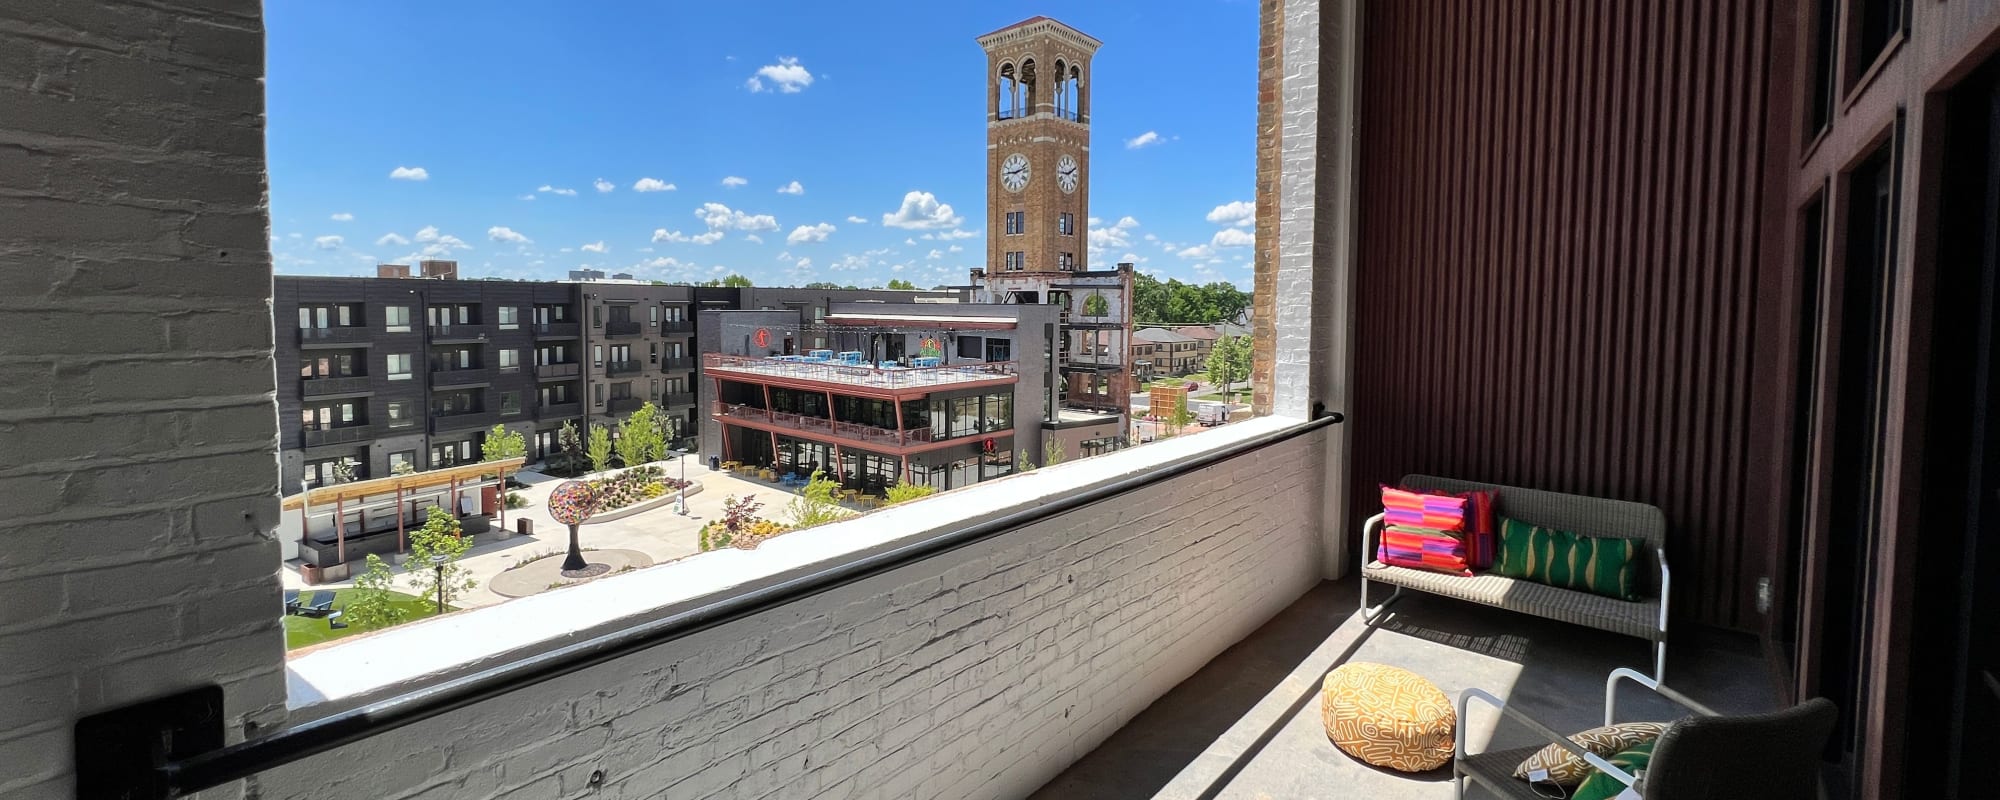 Beautiful City Views at Factory 52 Apartments in Norwood, Ohio